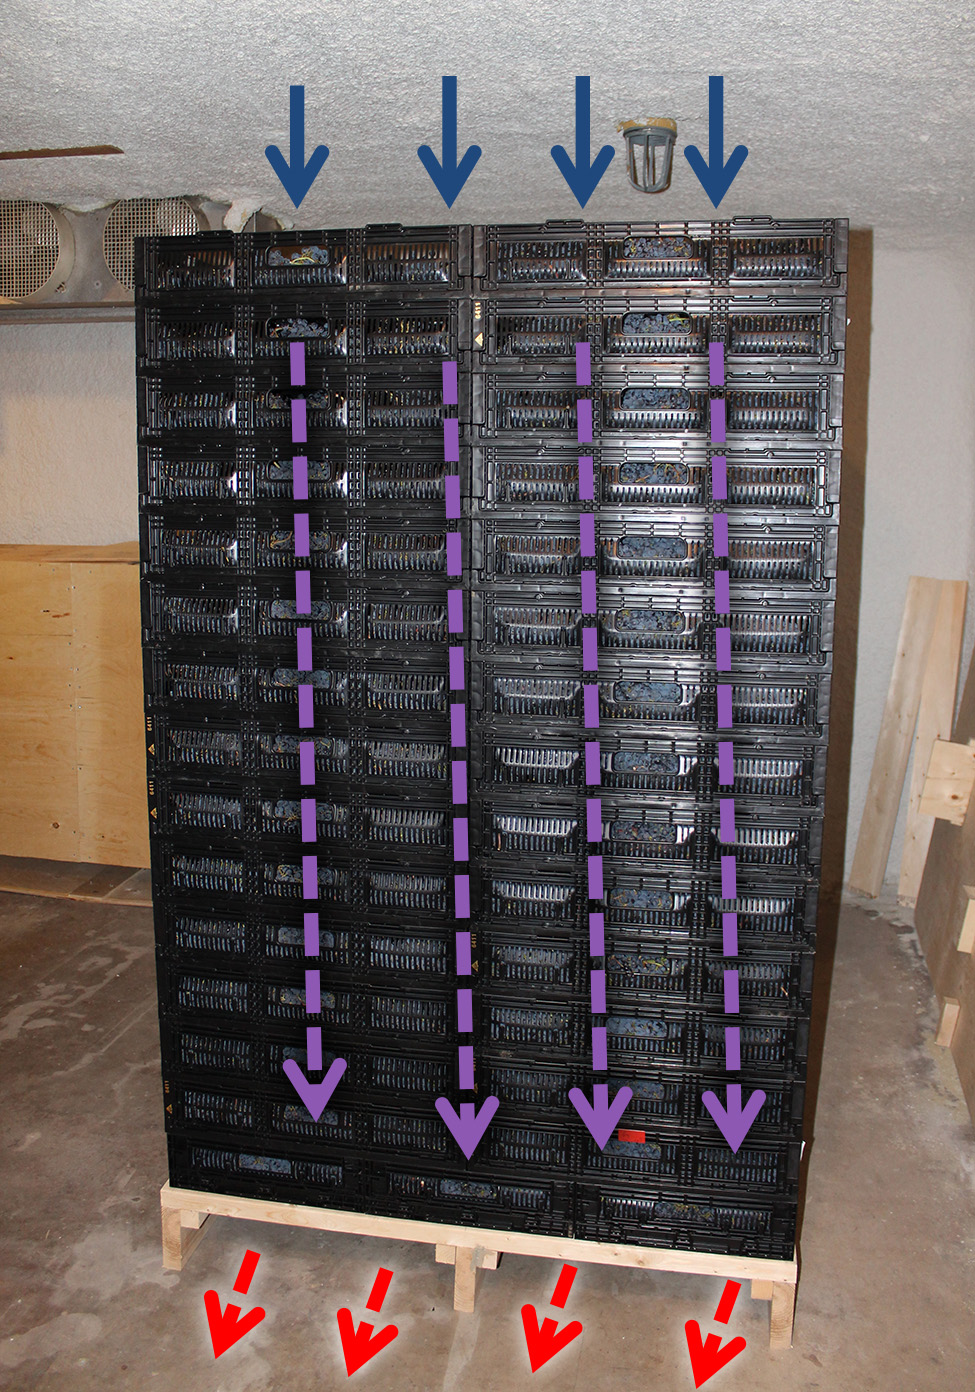 This column vertical airflow system uses reusable plastic containers with bottom vents. Cold air (blue arrows) is pulled vertically down from the top.